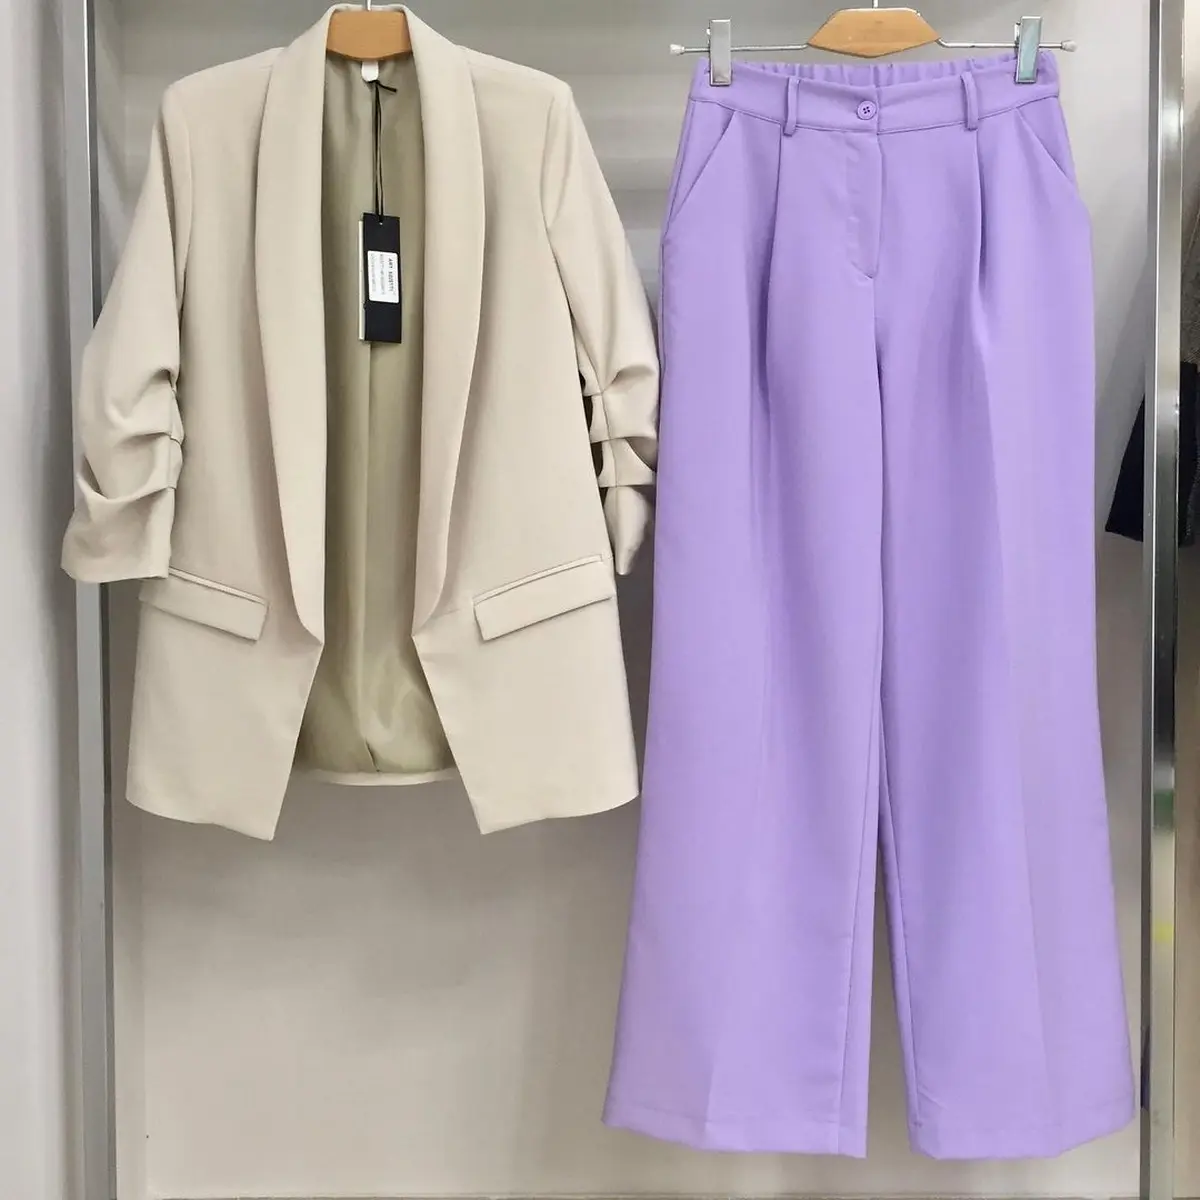 What to wear with purple pants? Best outfit ideas for females